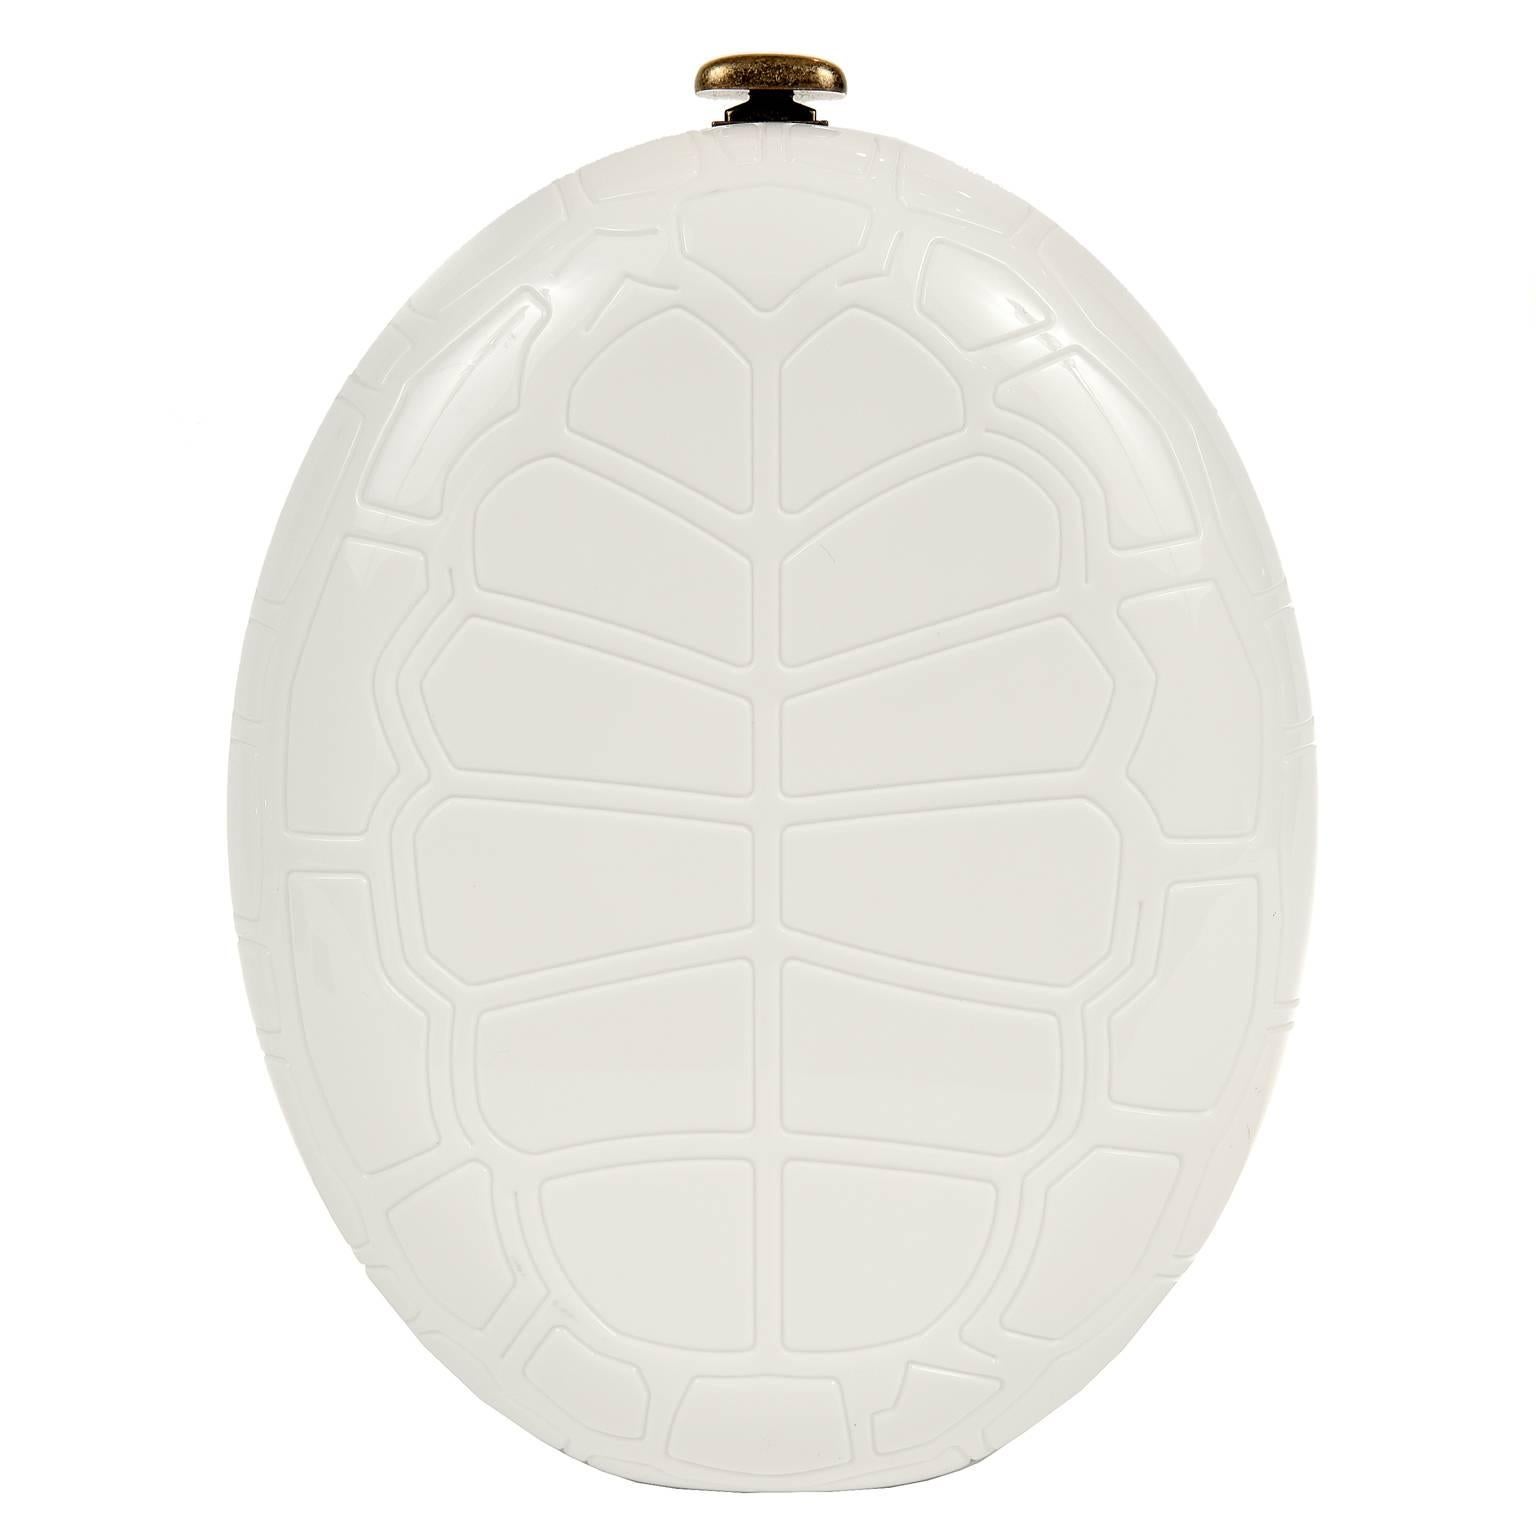 Chanel Ivory Turtle Shell Print Bag is from the 2016 Cruise Collection.  It is pristine.  
Ivory resin oval is imprinted with turtle shell pattern.  Antiqued gold hardware accents and extra- long chain strap.  Press lock clasp accesses the beige